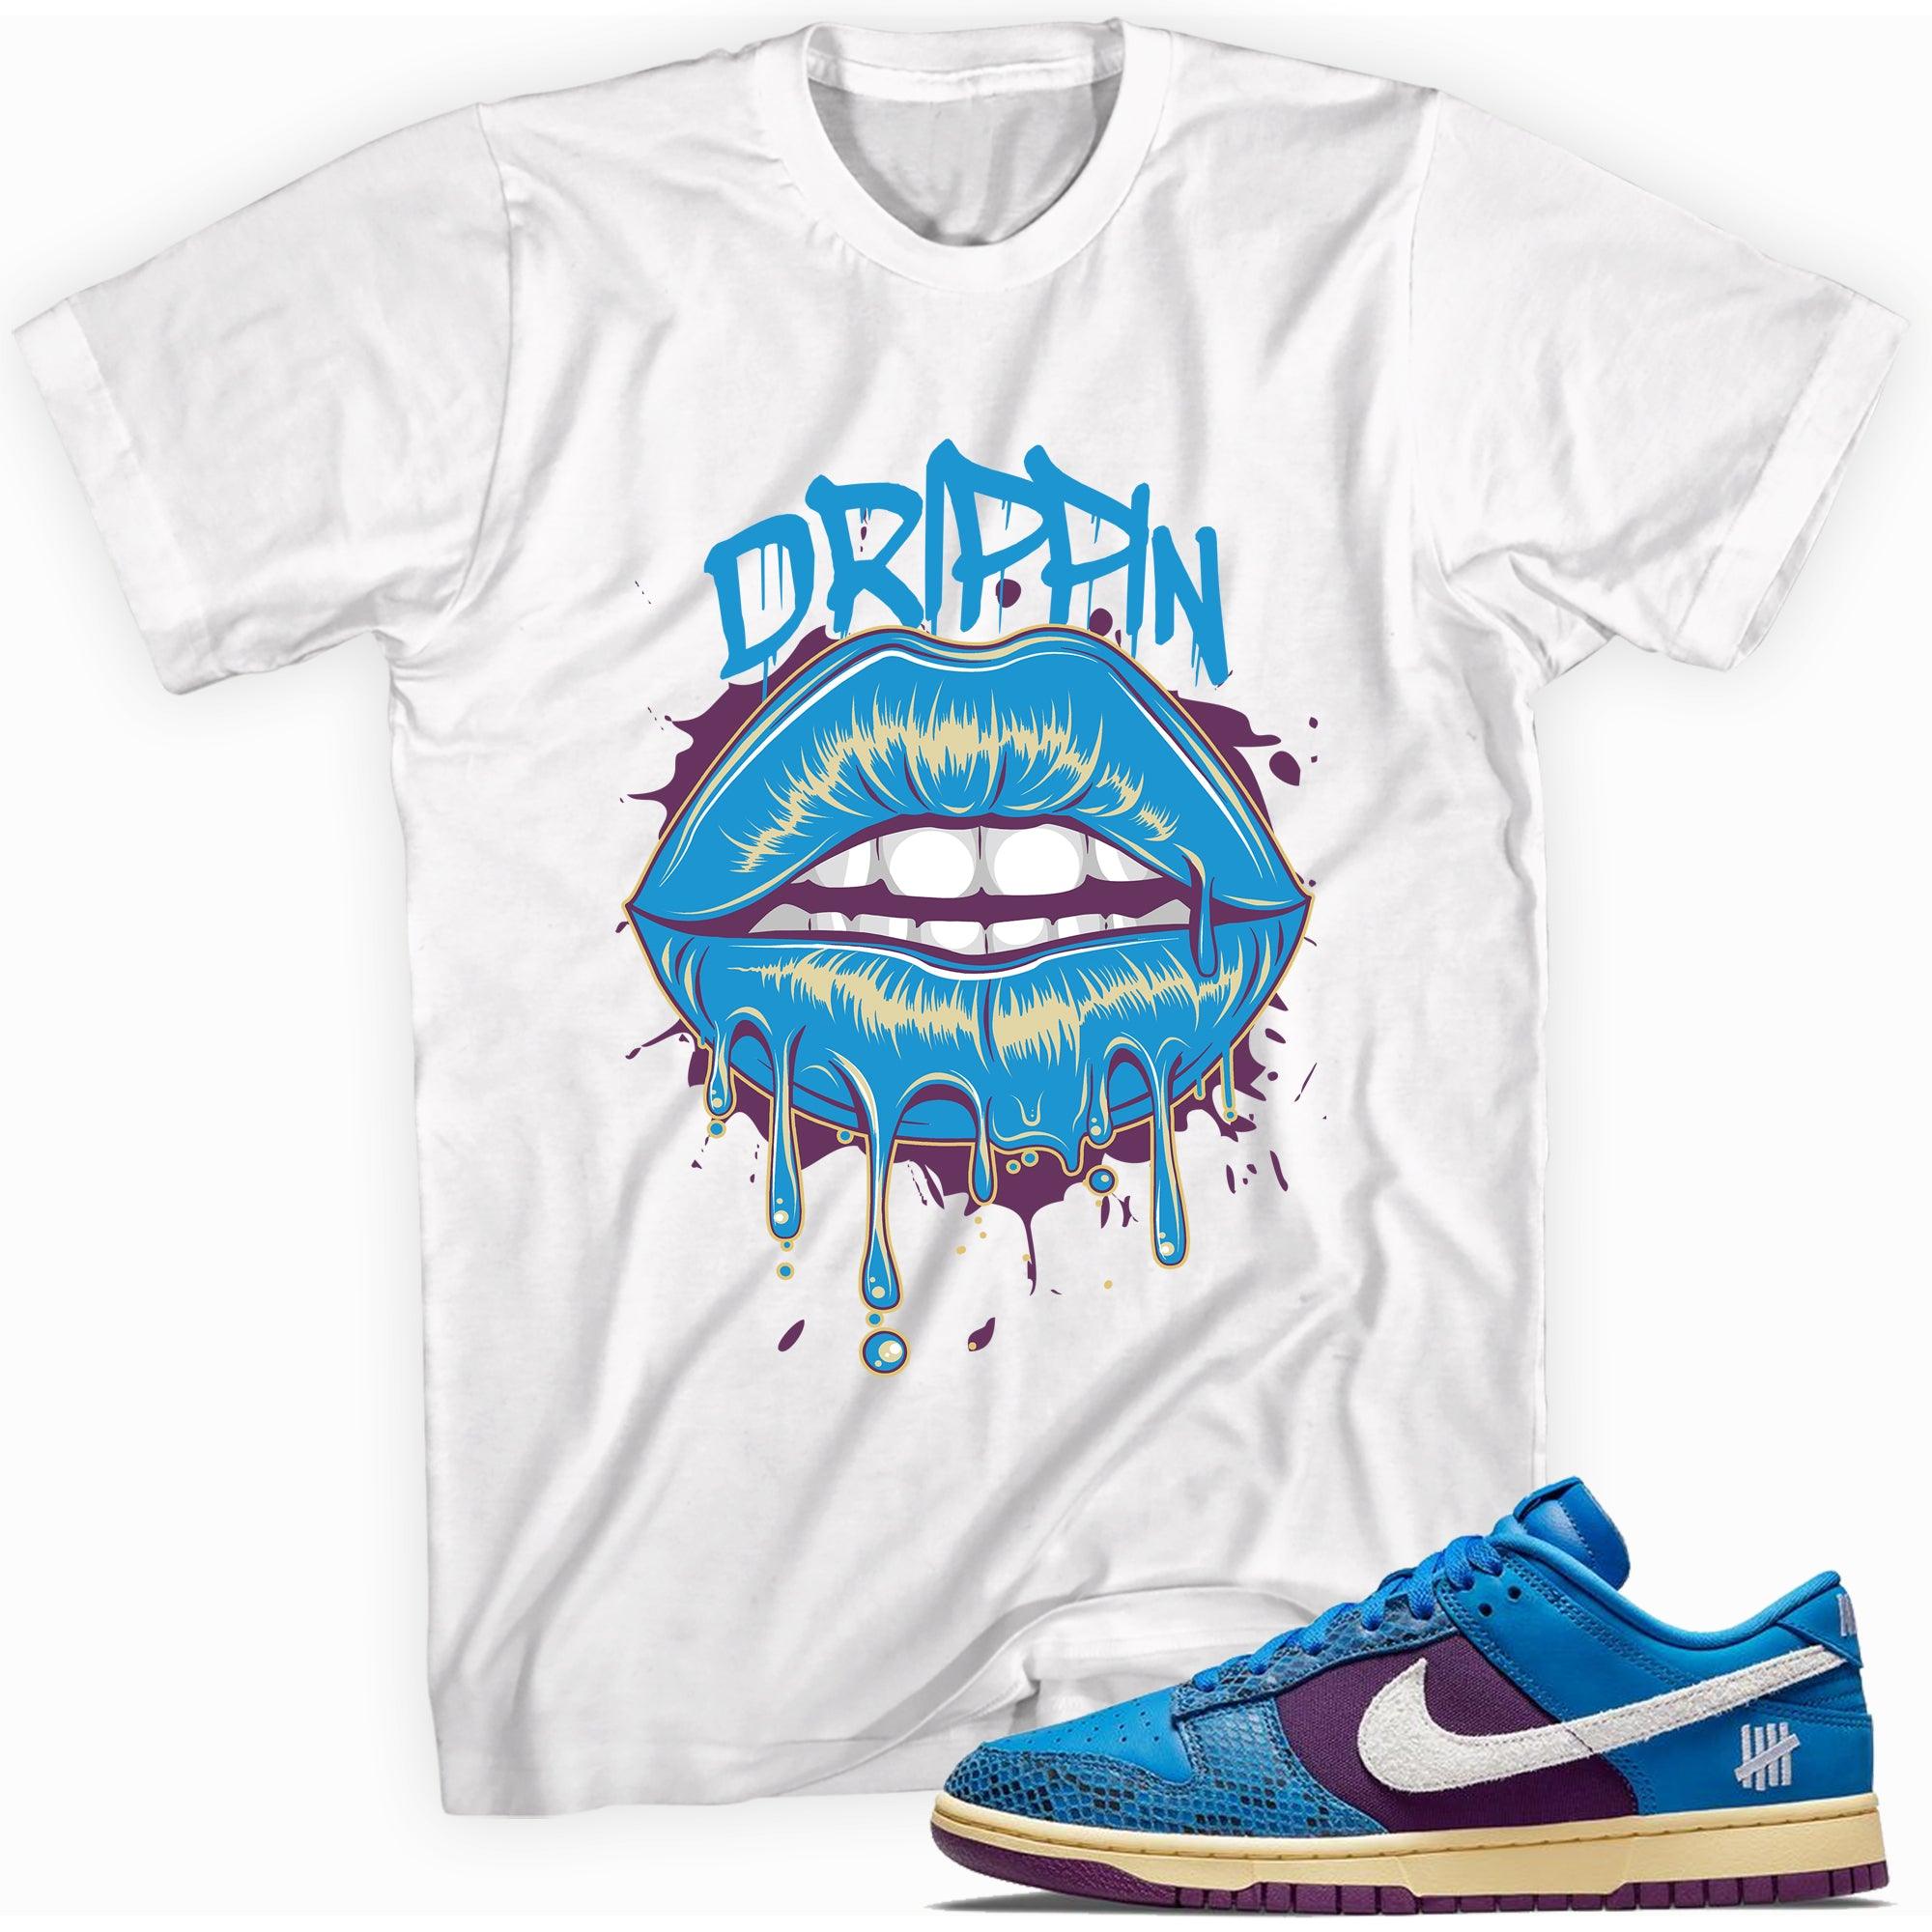 White Drippin Lips Shirt Nike Dunks Low Undefeated 5 On It Dunk vs AF1 photo